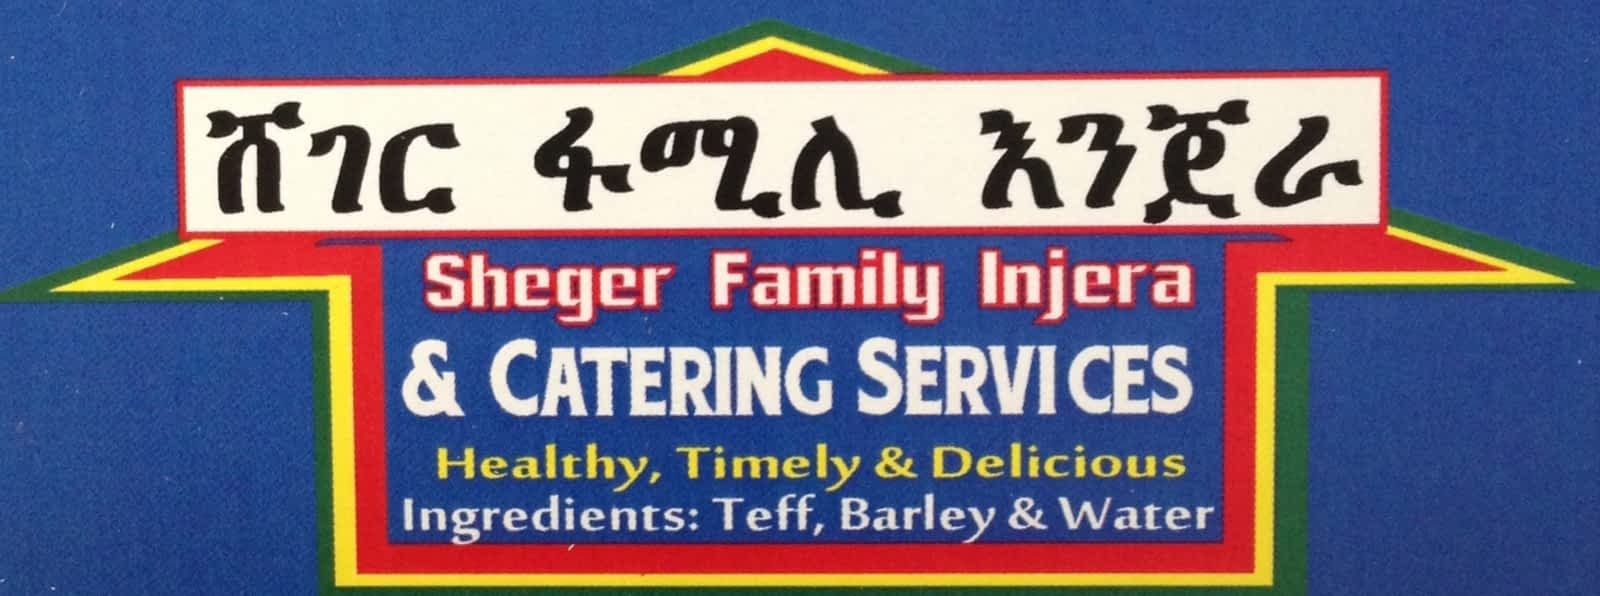 Sheger Family Injera & Catering Services